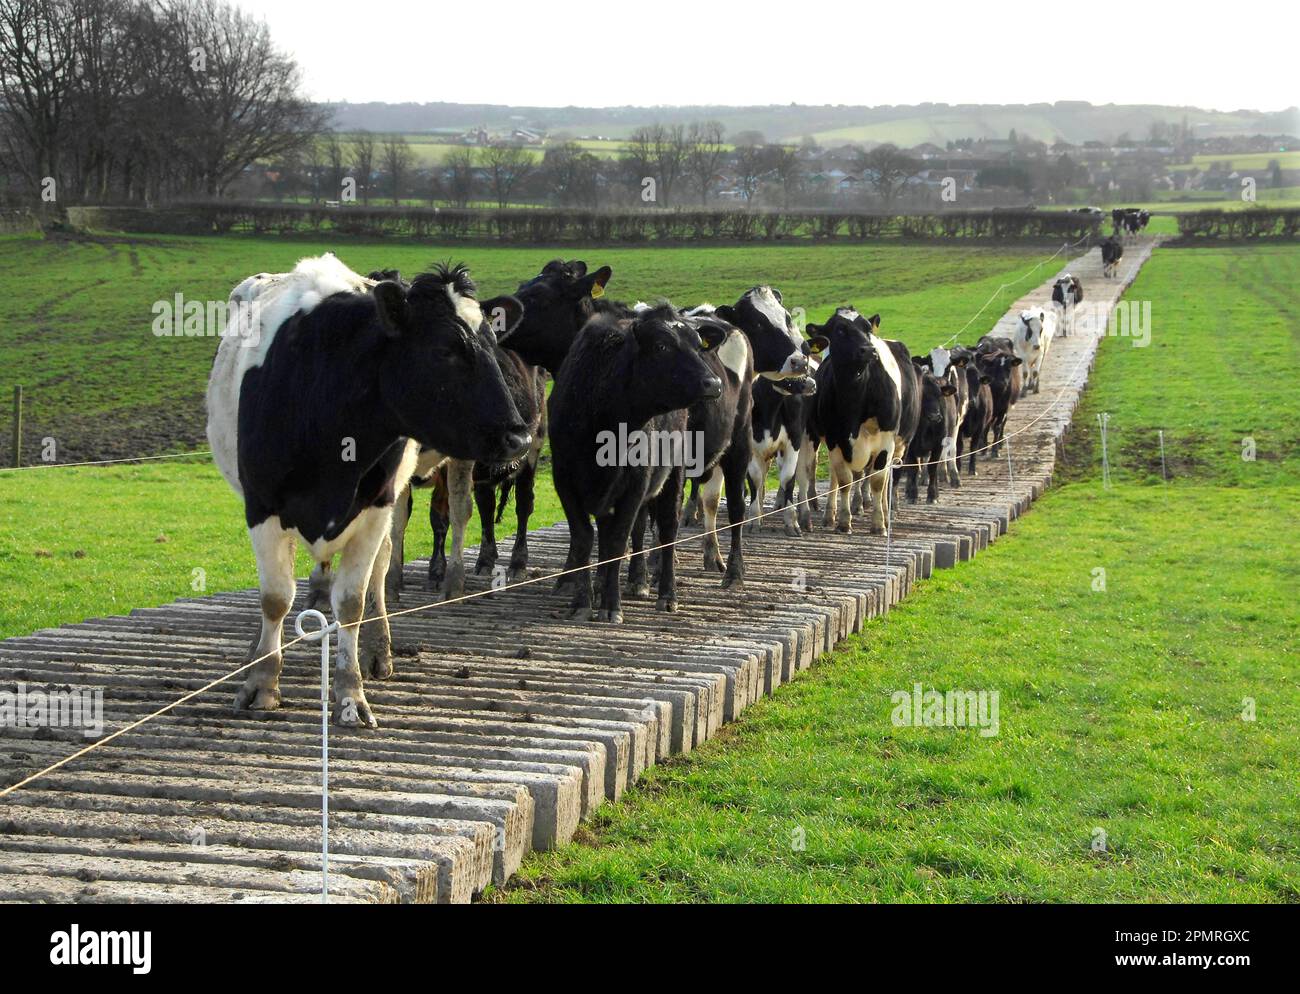 Domestic cattle, Holstein Friesian cows, standing on movable cow track, made of concrete railway sleepers, England, Great Britain Stock Photo